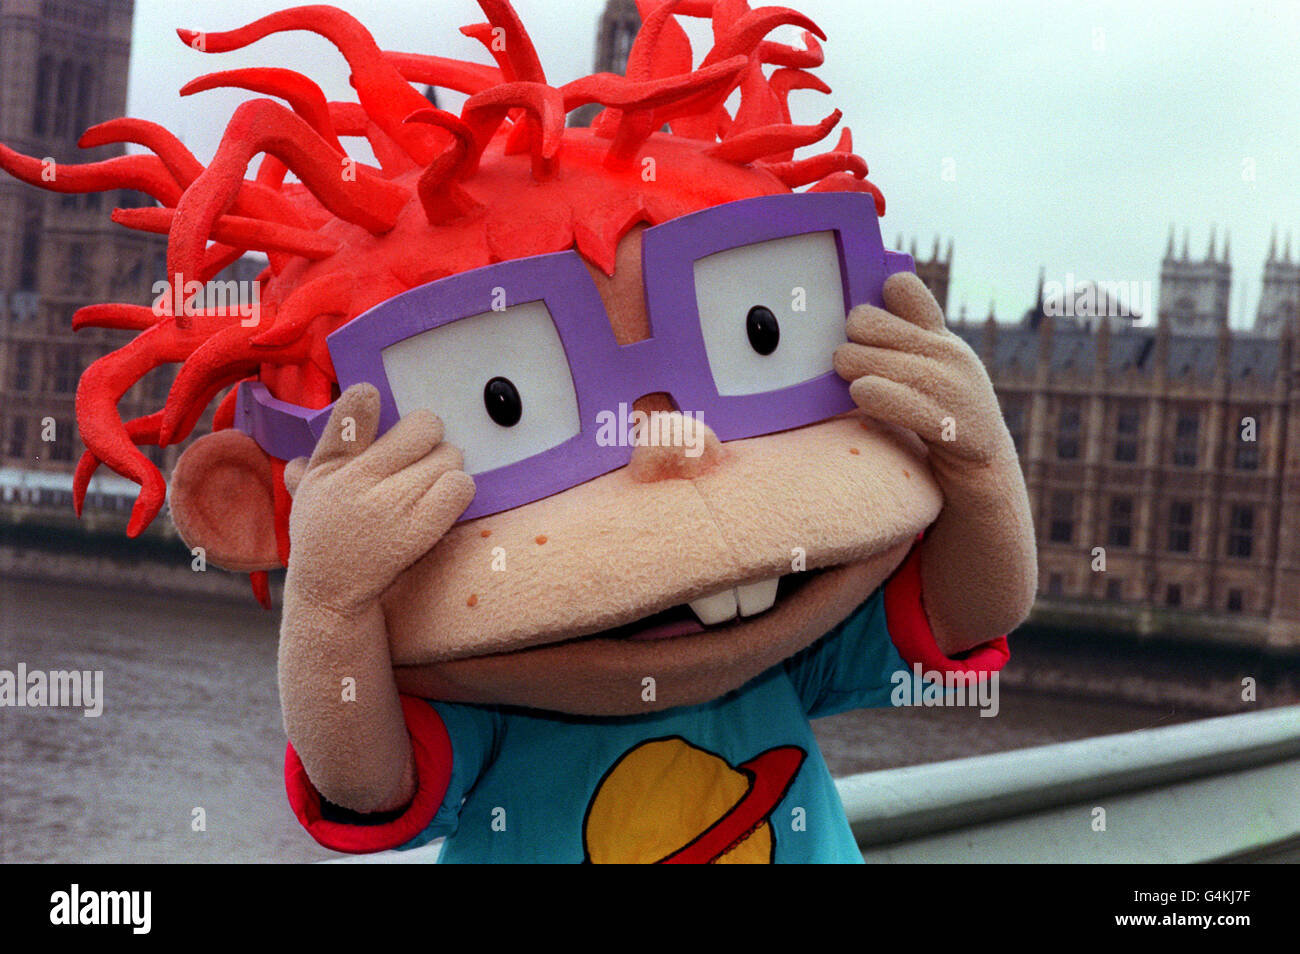 Chuckie From The Children S Television Cartoon Show Rugrats Enjoys A Trip To Westminster Bridge In London By The Houses Of Parliament To Launch Rugrats A Live Adventure The Cartoon Favourites Are